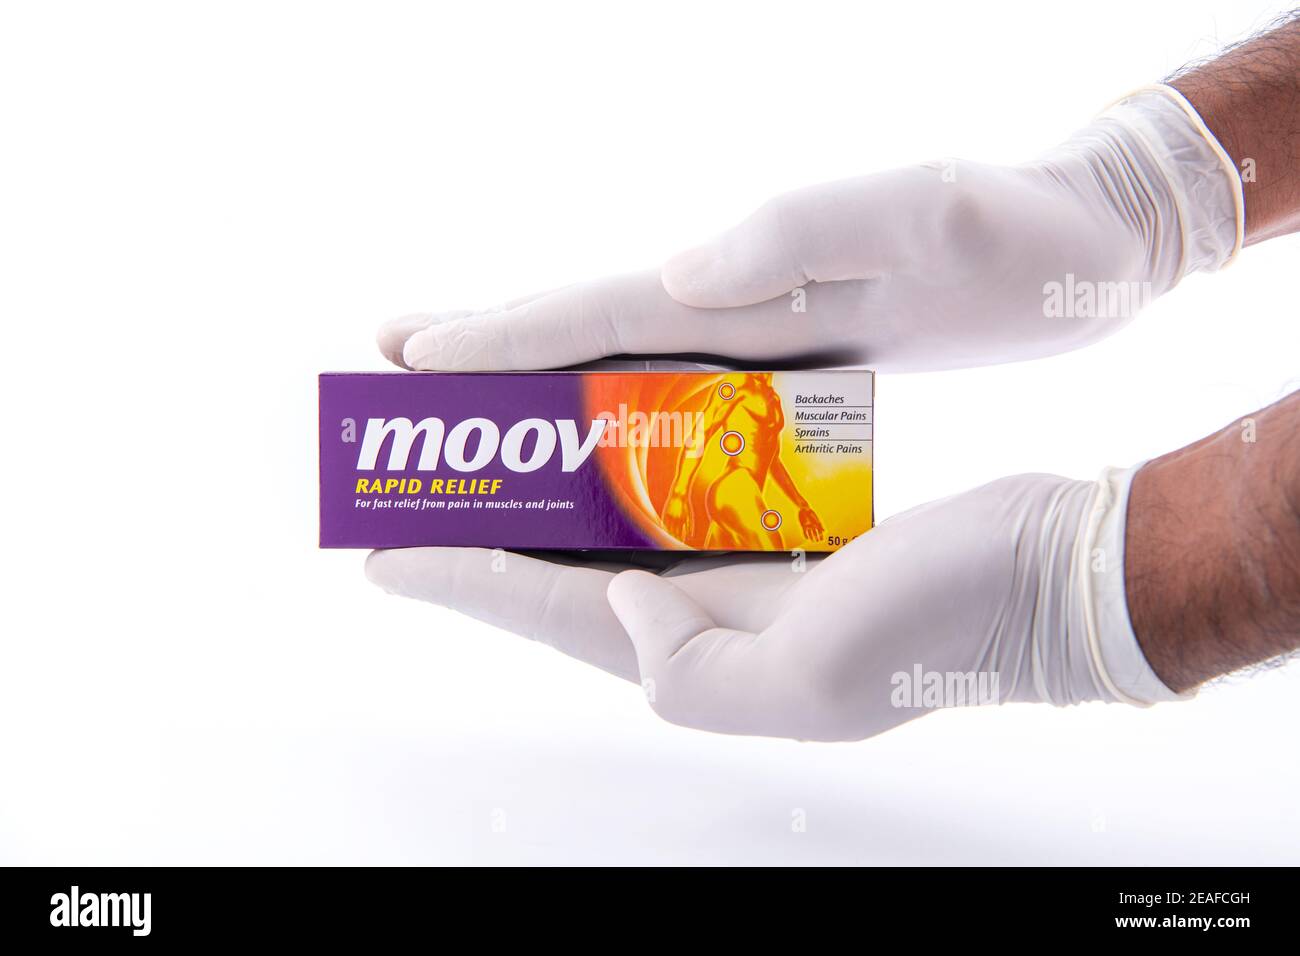 Moov Rapid relife muscle pain killer on white background Stock Photo